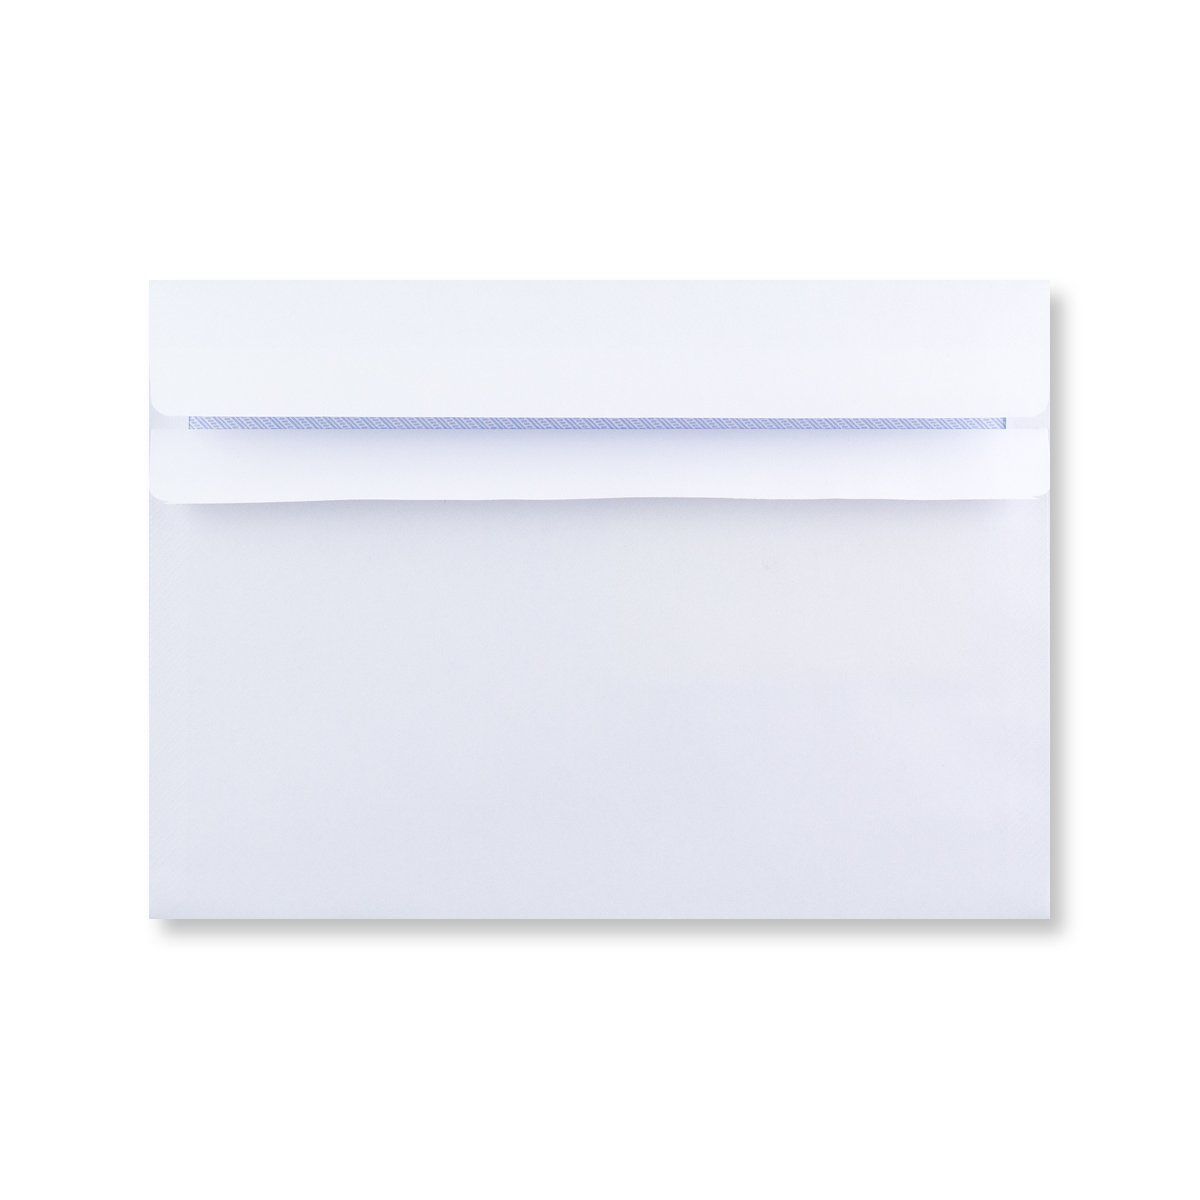 Commercial Self Seal Envelopes - A6/C6 - 162mm x 114mm - White - Wallet - 90gsm - Box of 1,000